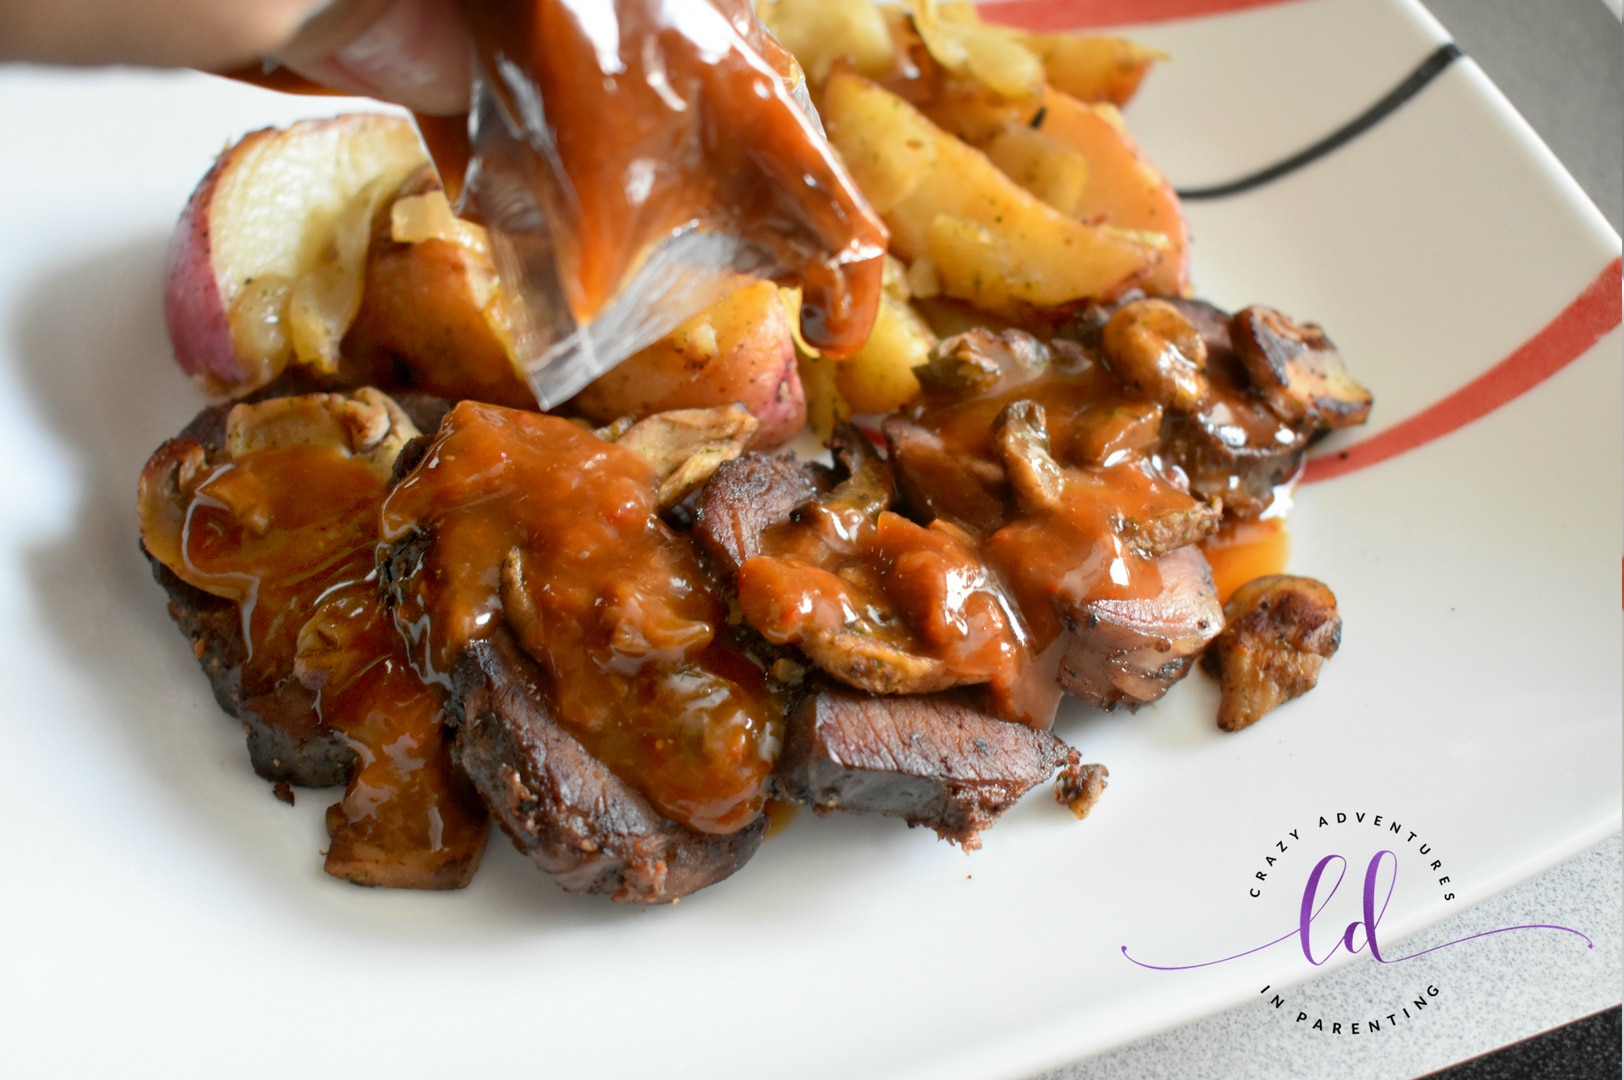 Tyson Fully Cooked Dinner and Entrée Kit - Seasoned Steak Fillet & Mushrooms drizzled sauce